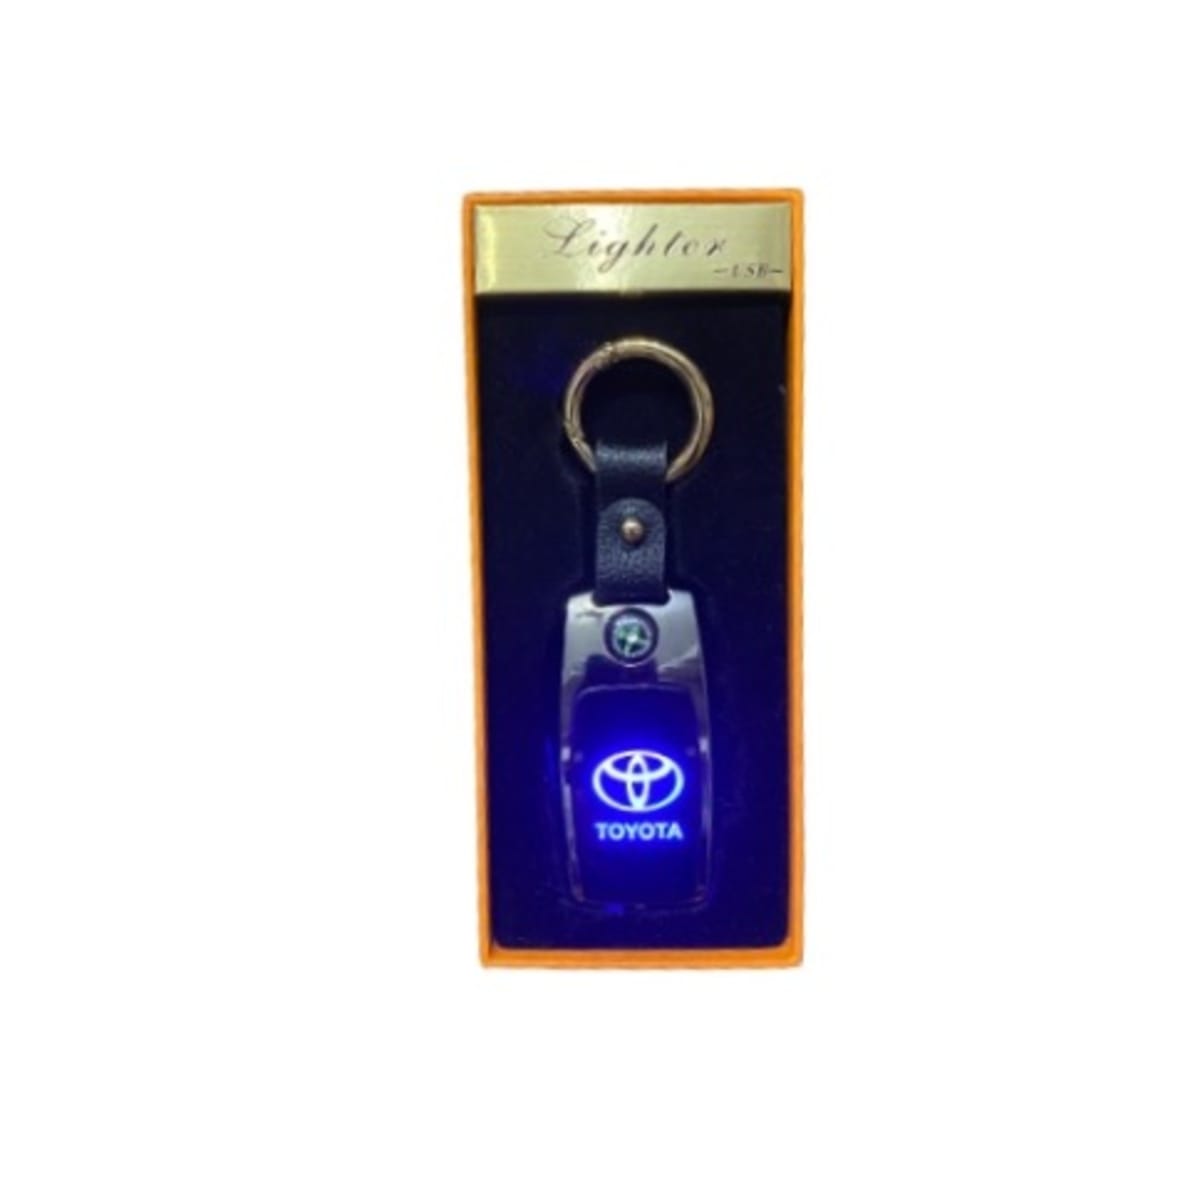 Toyota Key Holder With Usb Charger Port And Lighter